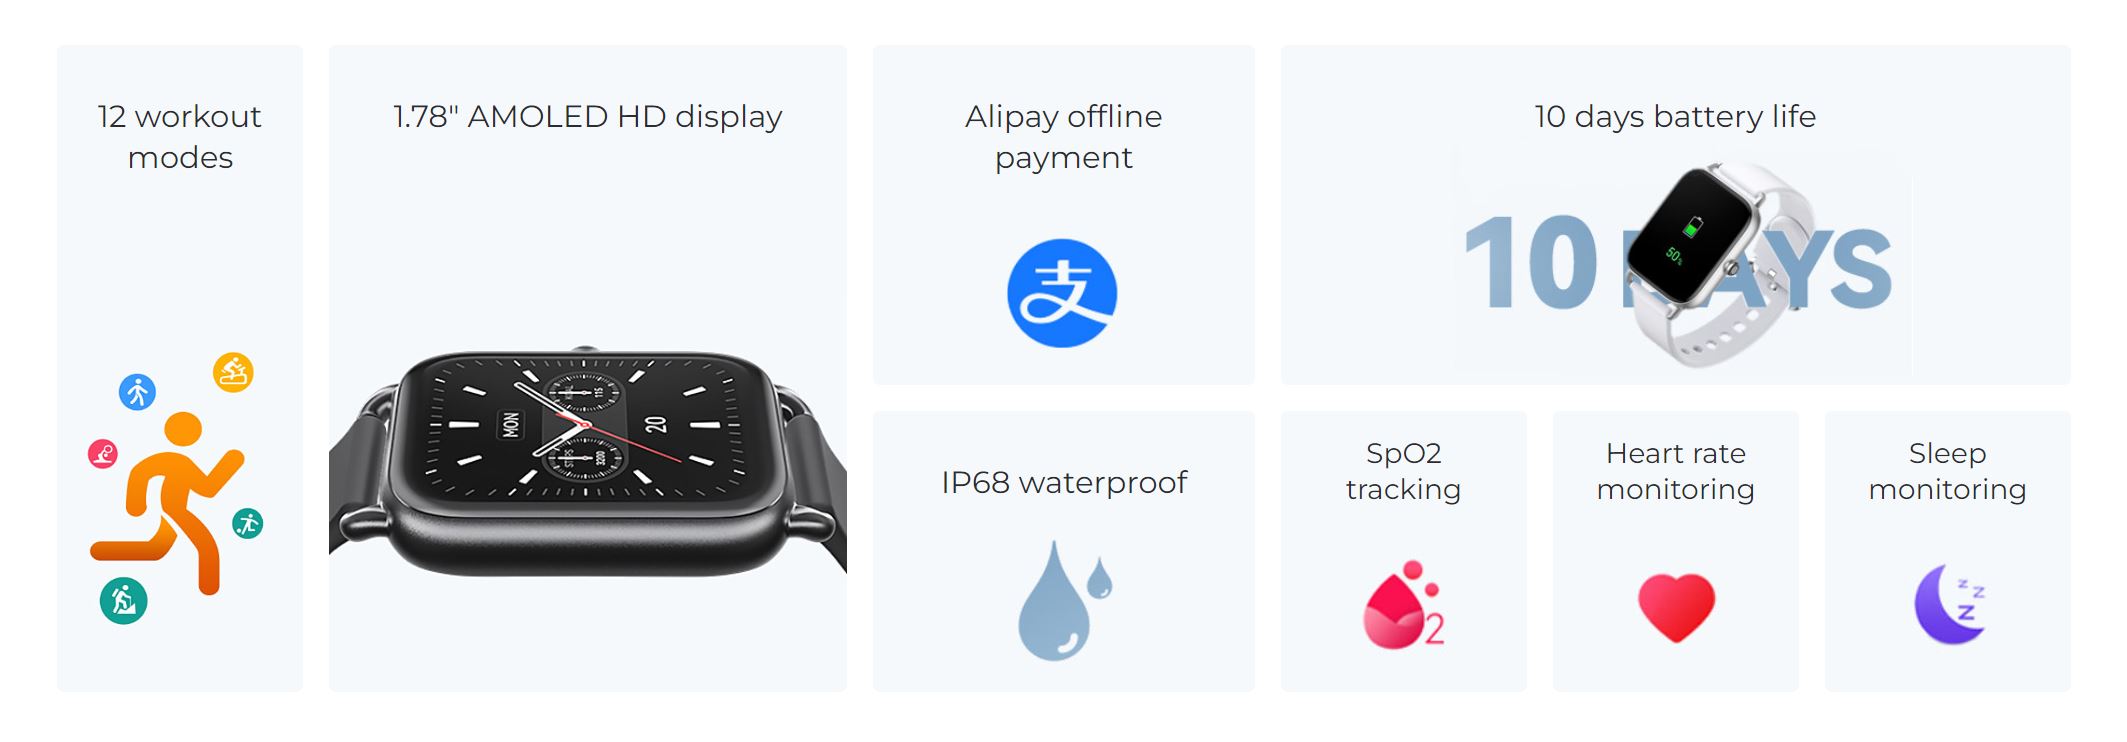 Main Features of Haylou RS4 LS12 Smart Watch 